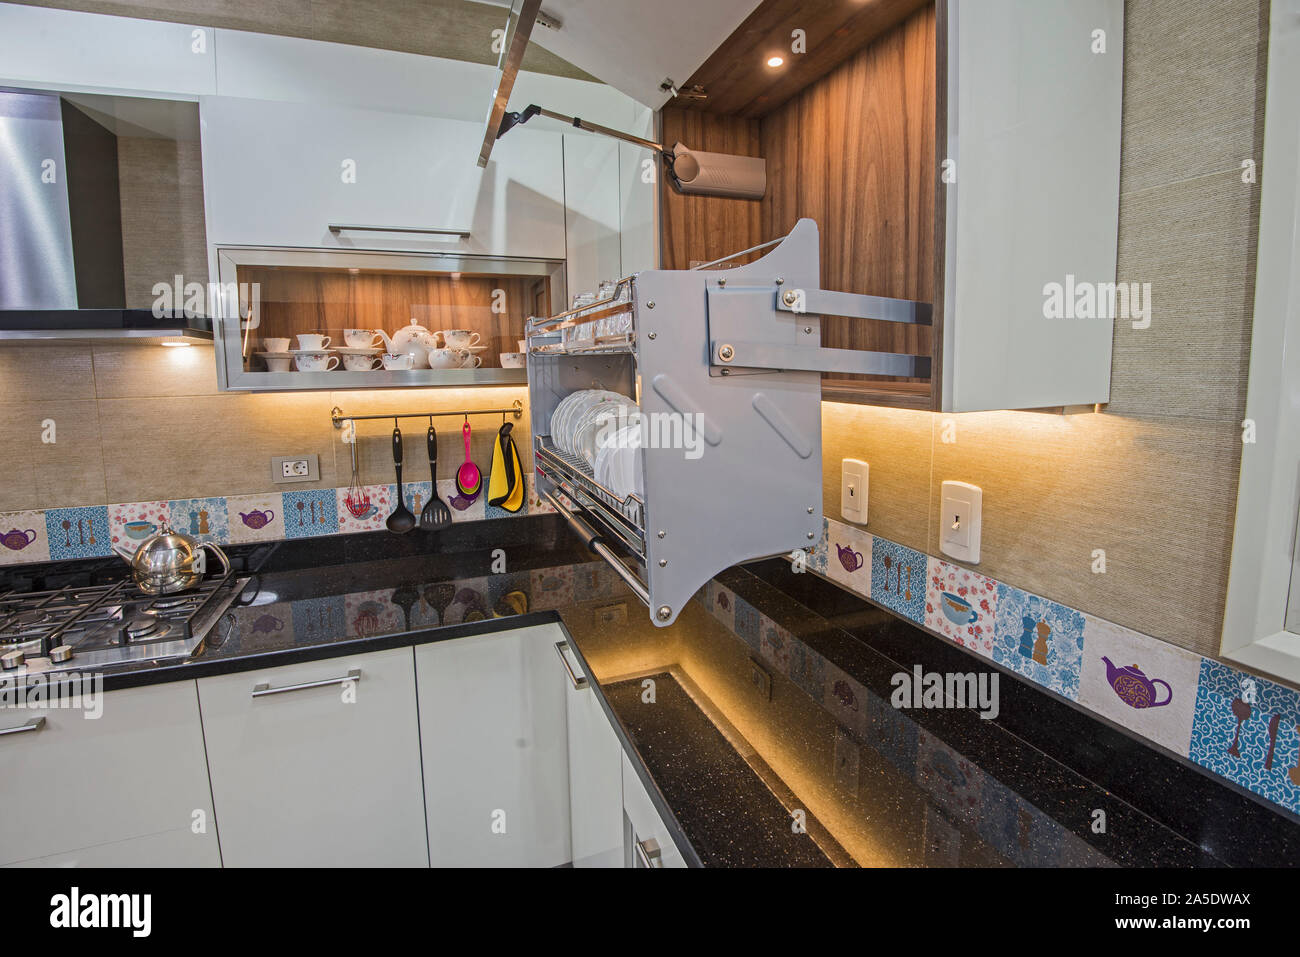 https://c8.alamy.com/comp/2A5DWAX/interior-design-decor-showing-modern-kitchen-with-swinging-cupboard-in-luxury-apartment-showroom-2A5DWAX.jpg